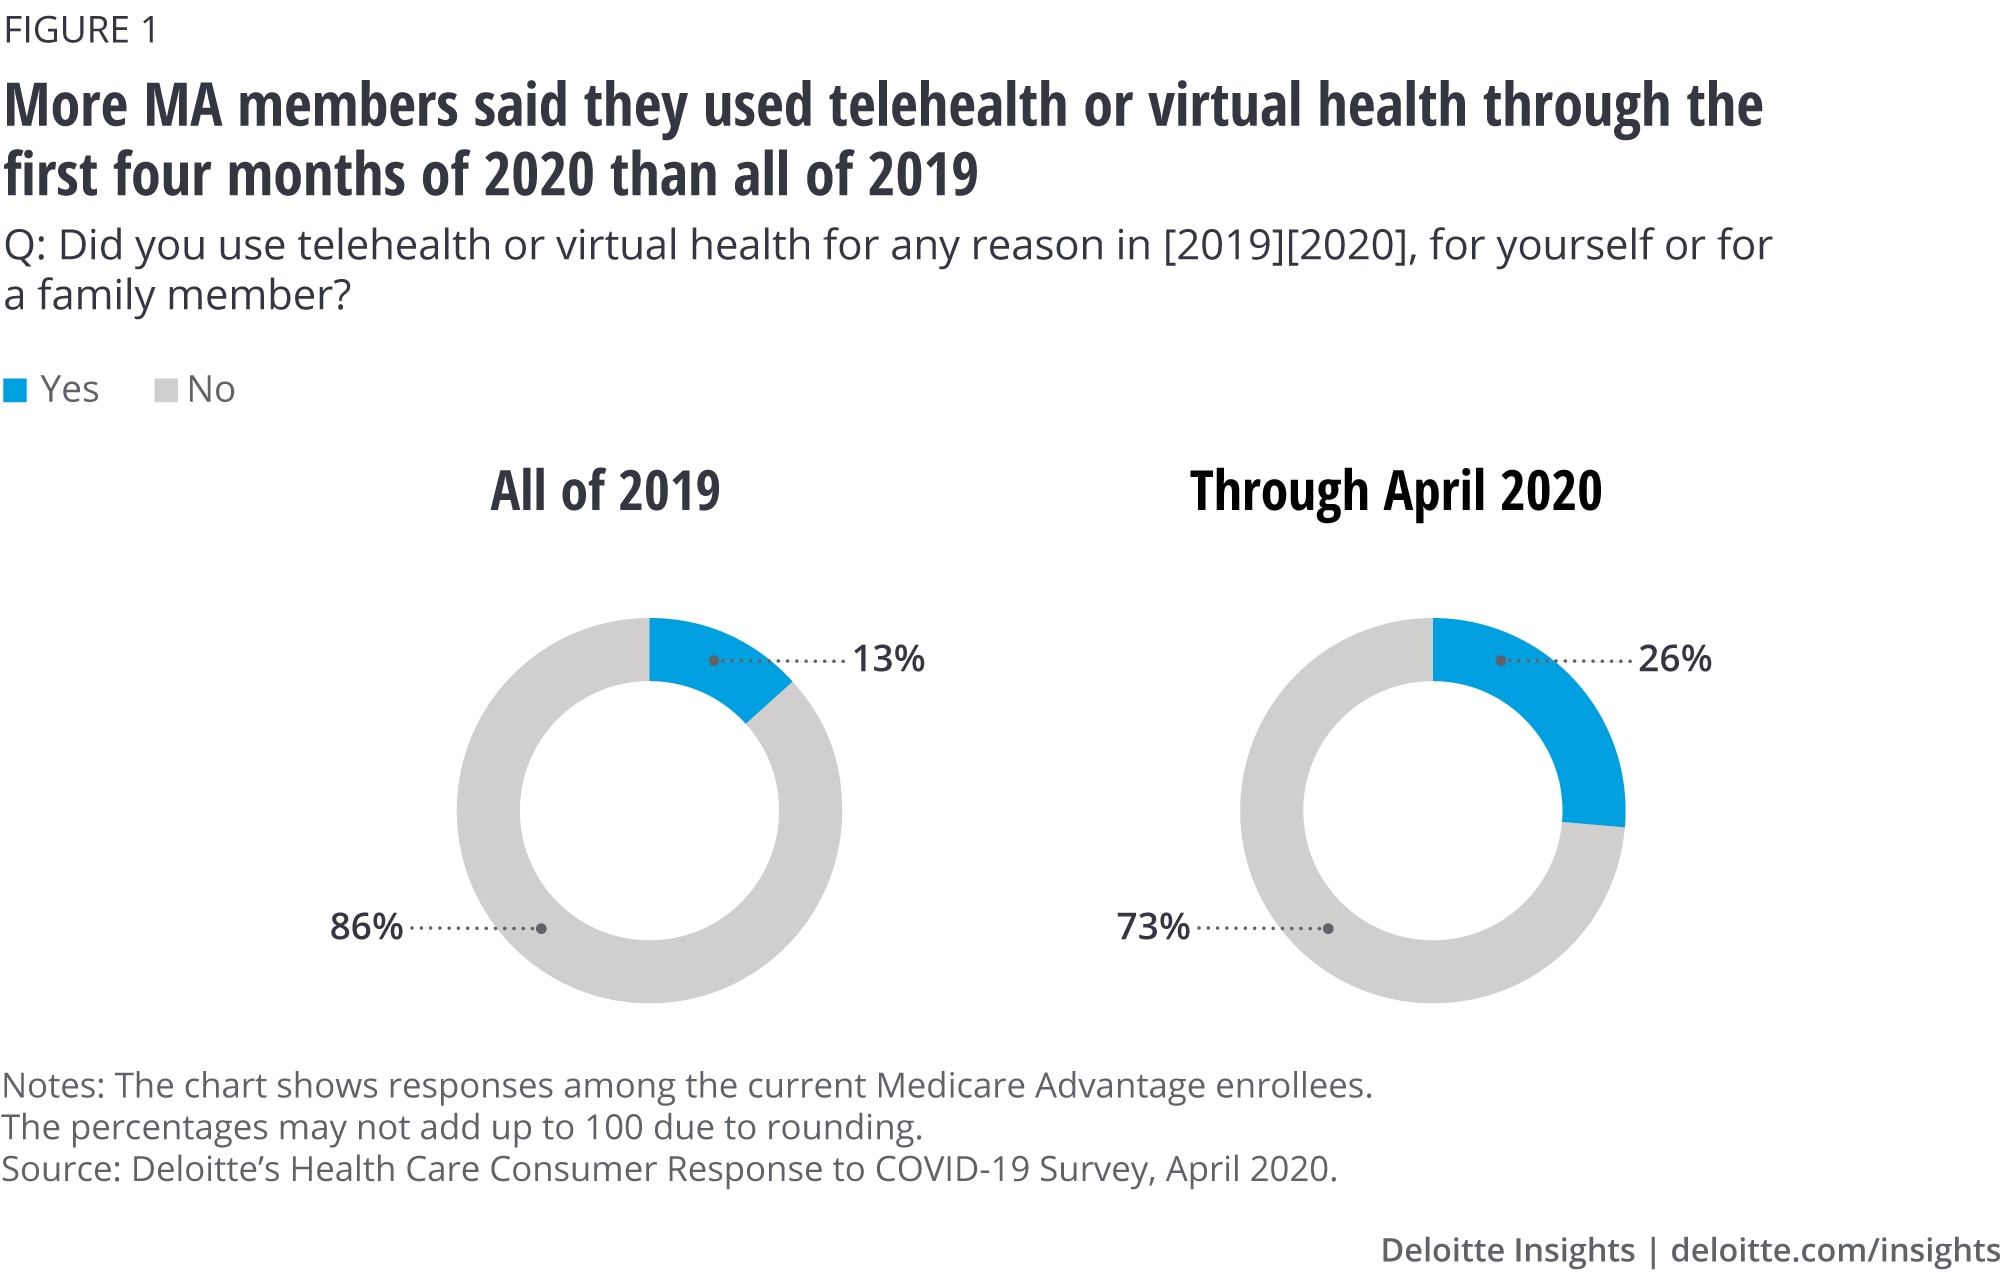 More MA members said they used telehealth or virtual health in the first half of 2020 than all of 2019